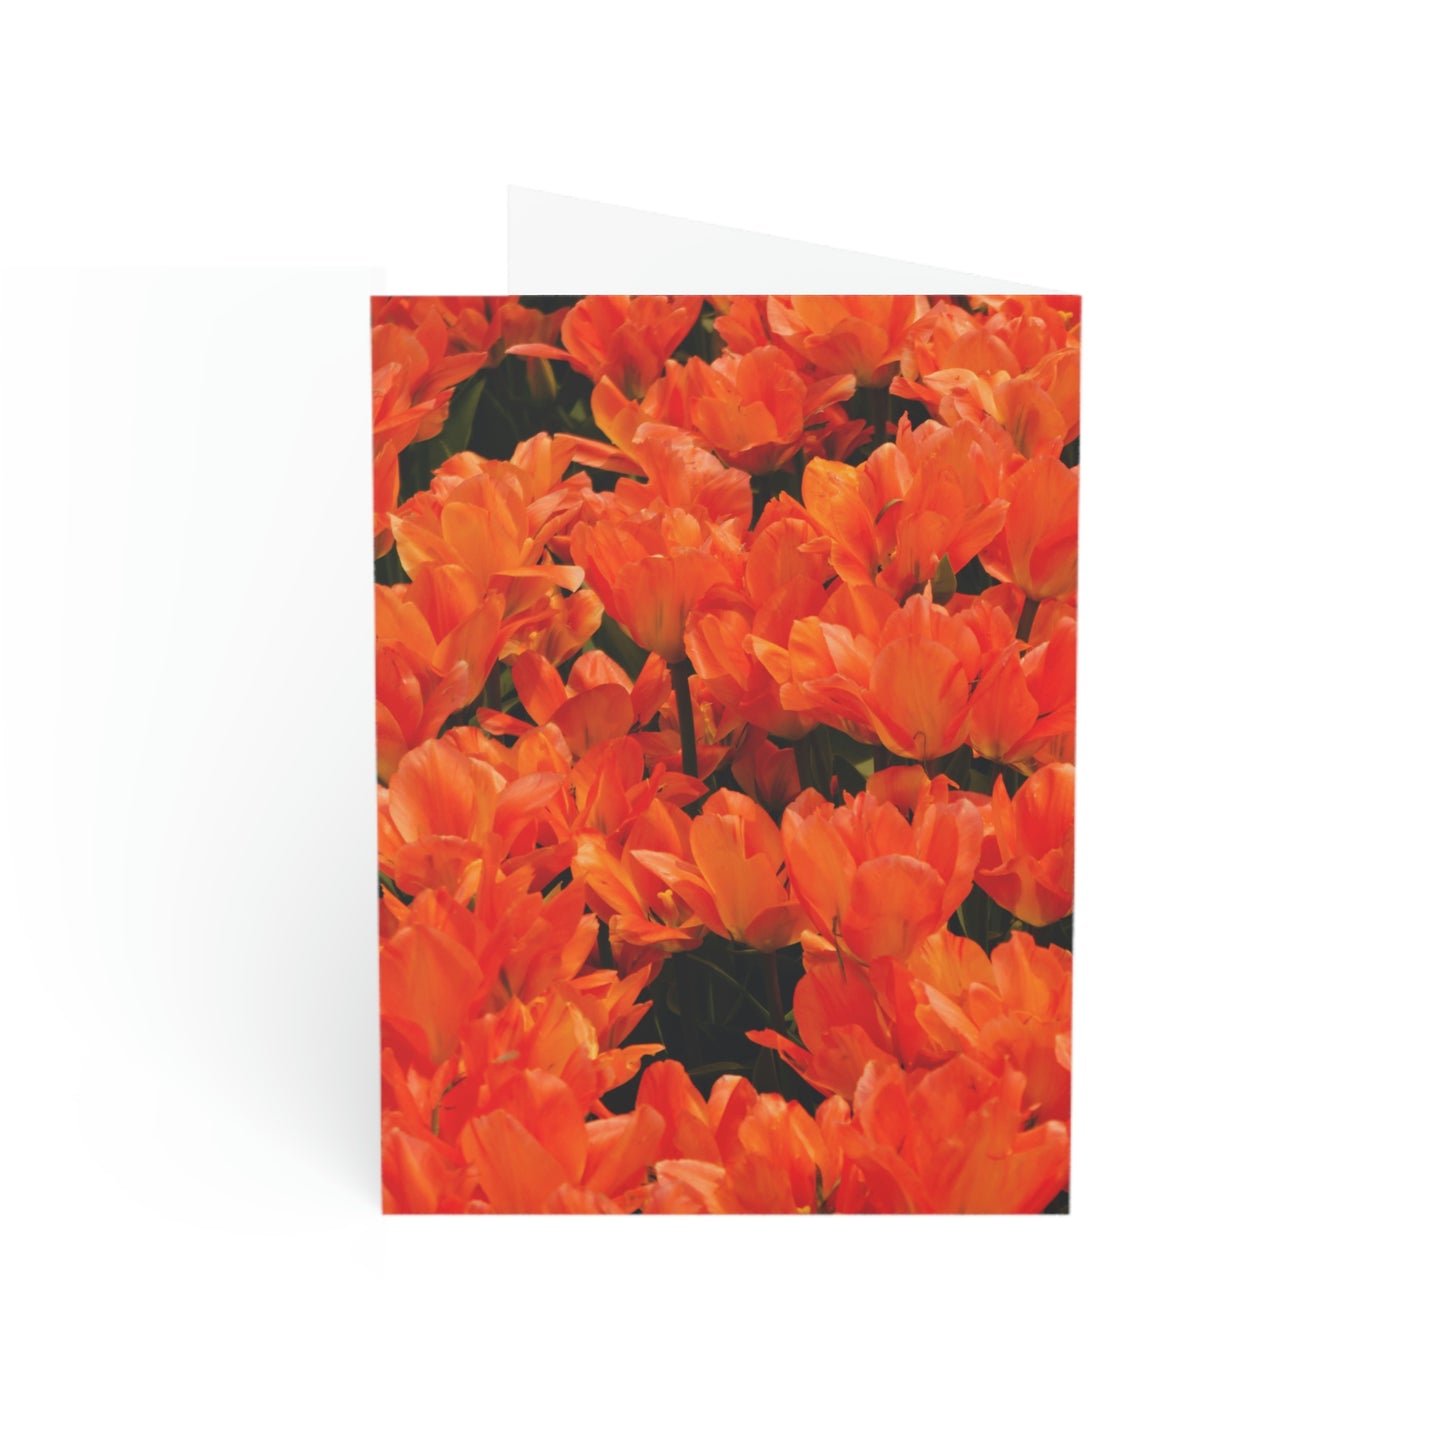 Flowers 03 Greeting Cards (1, 10, 30, and 50pcs)